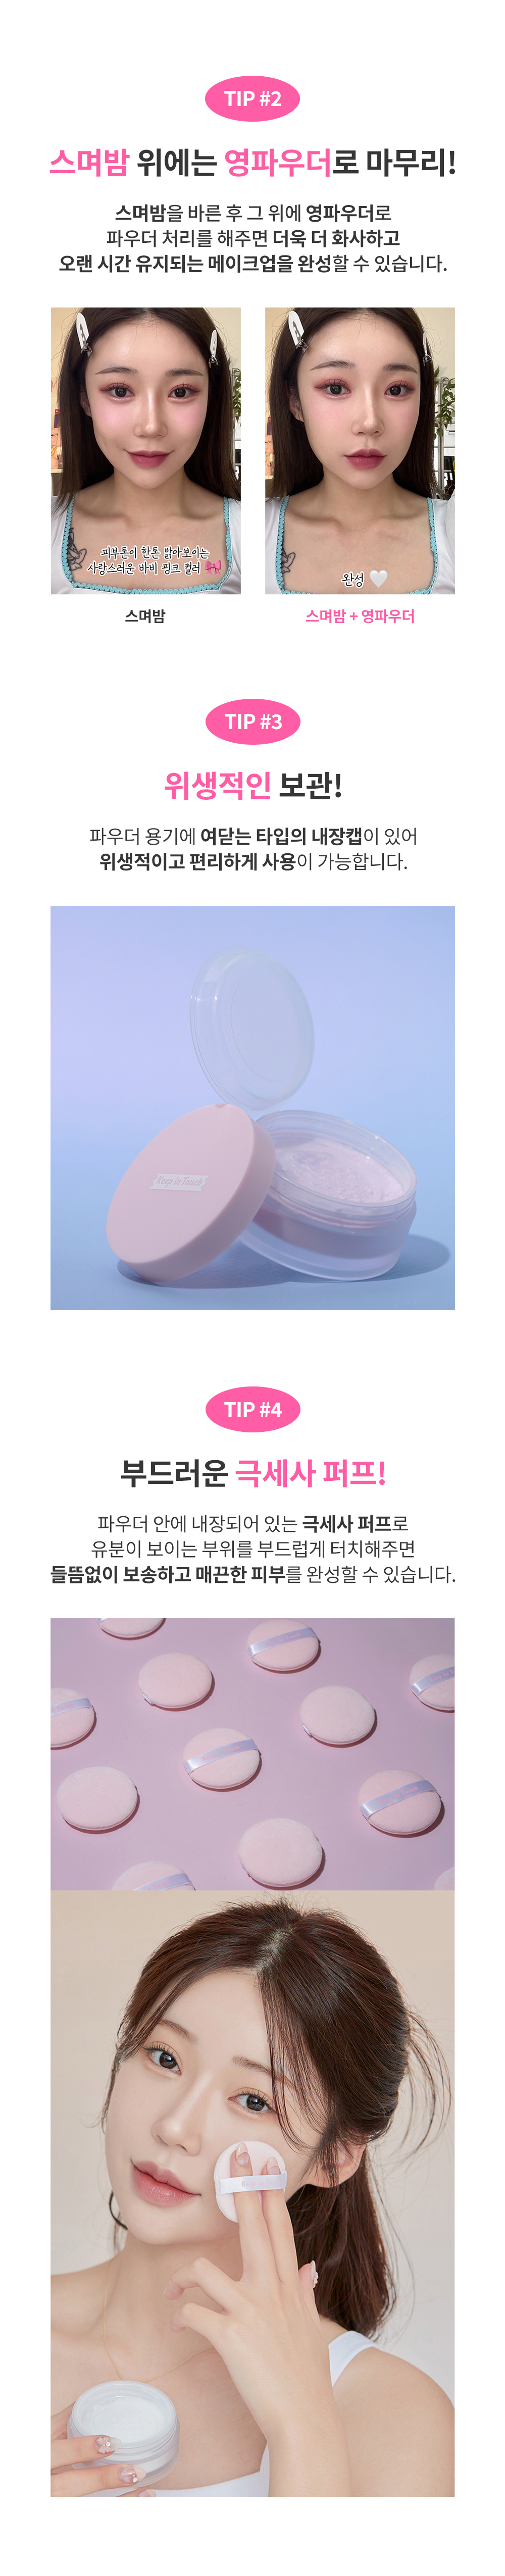 cosmetics baby pink color image-S1L24